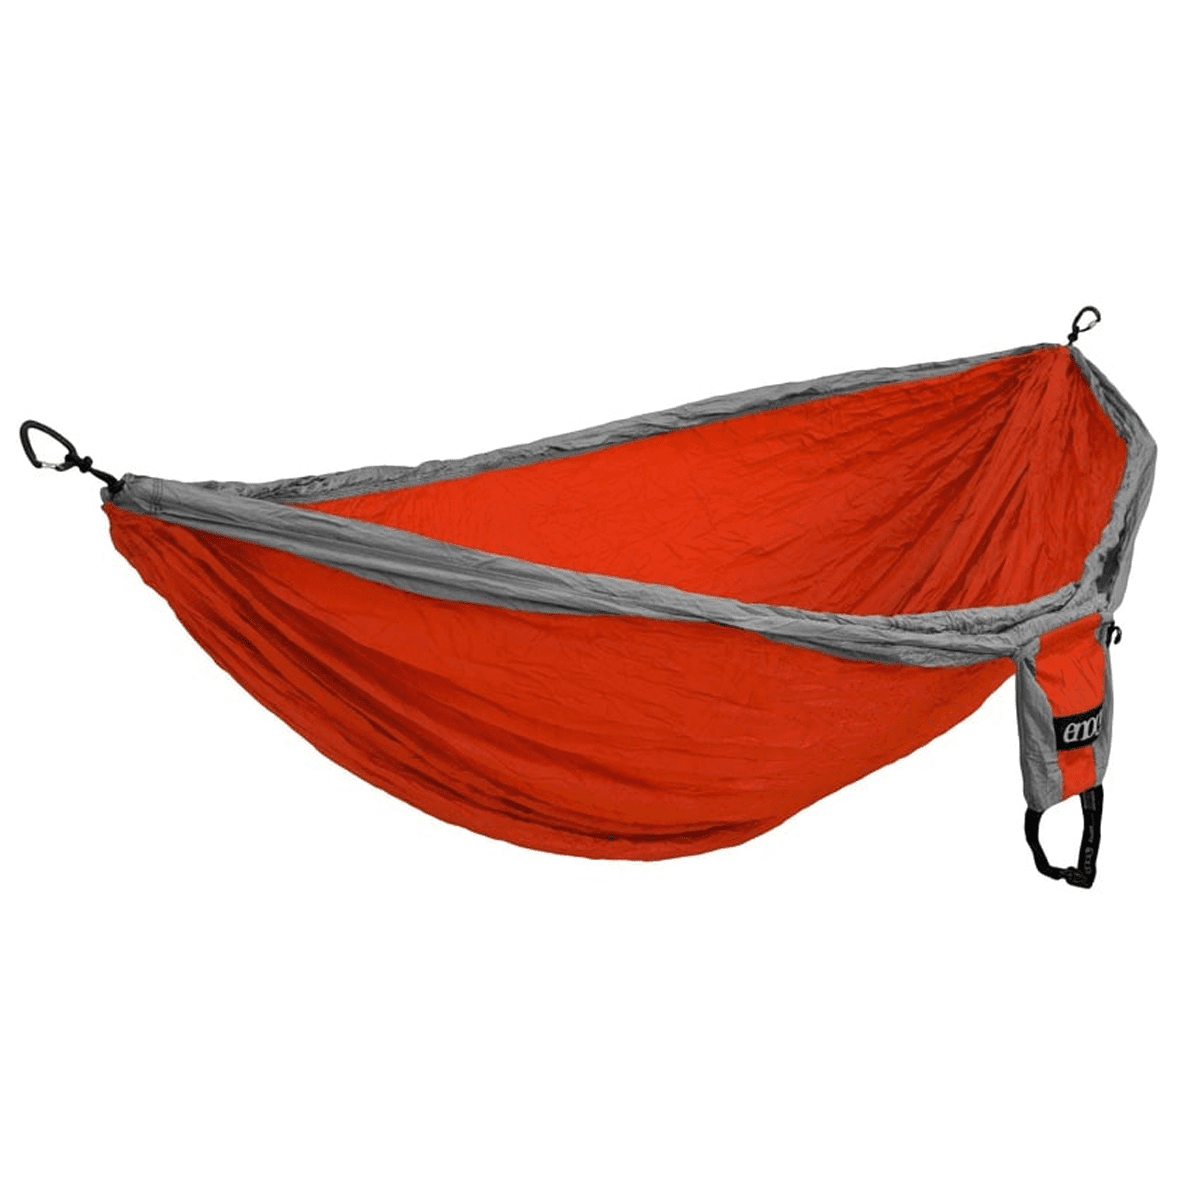 ENO Double Nest Hammock (Red-Charcoal)